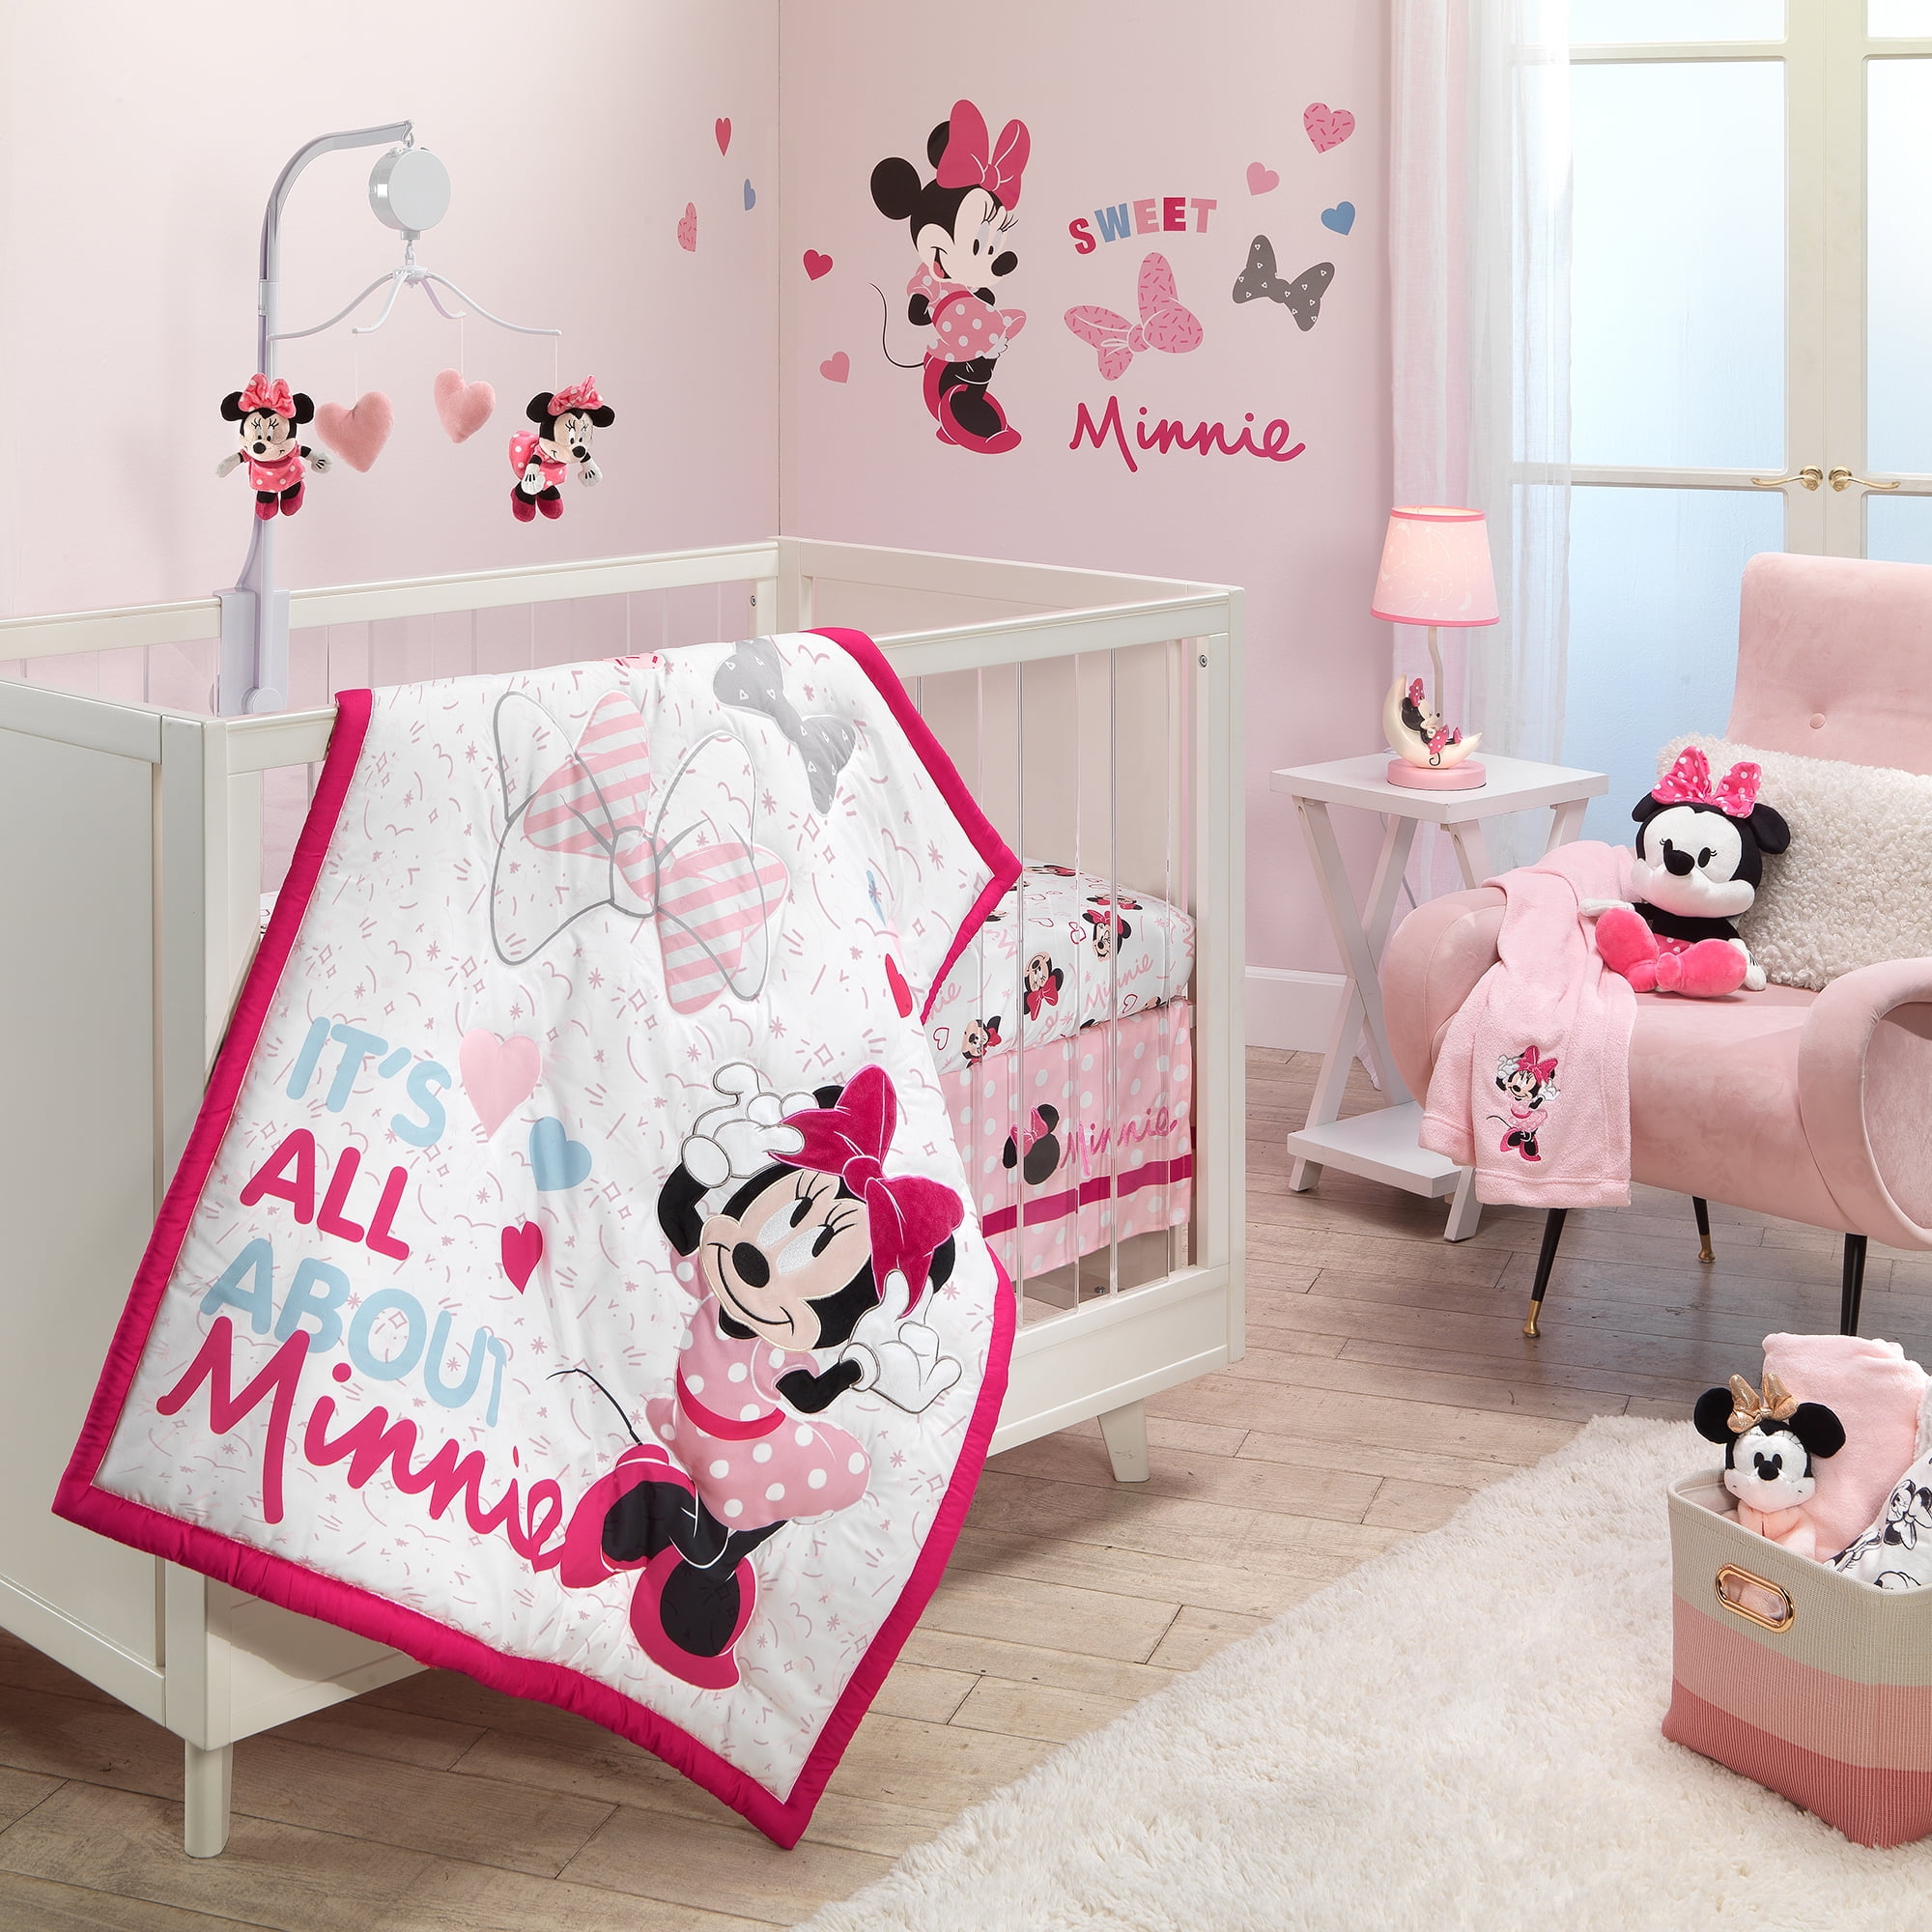 Minnie Mouse Design Room in a Box Set 7-pcs Includes Bedding Set And Drapes 